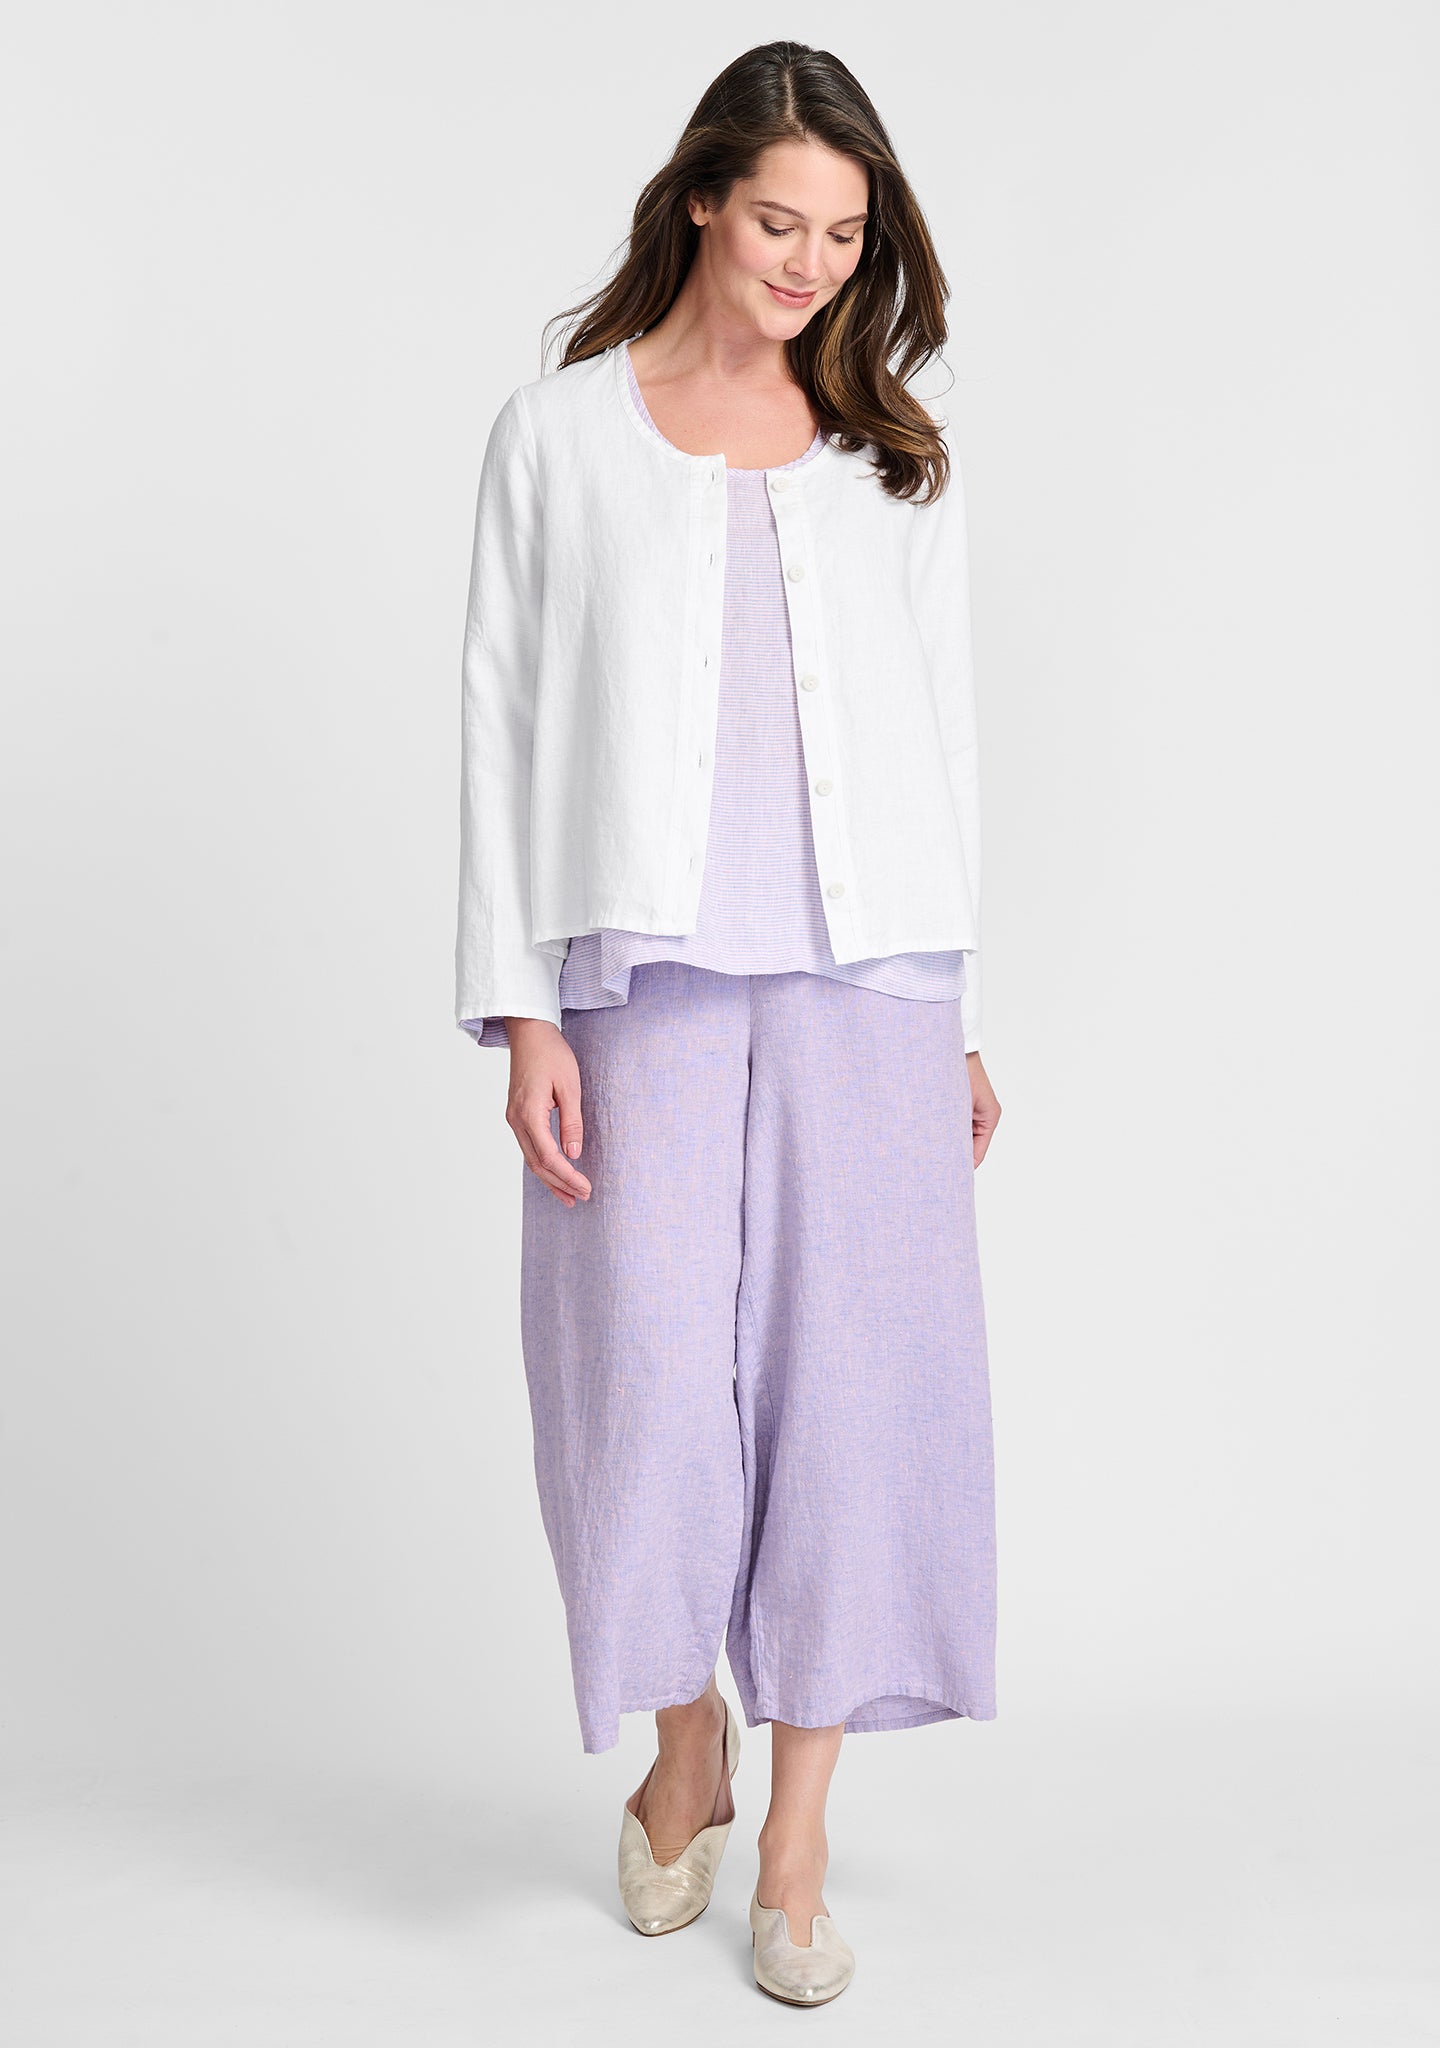 FLAX linen shirt in white with linen shirt in purple and linen pants in purple